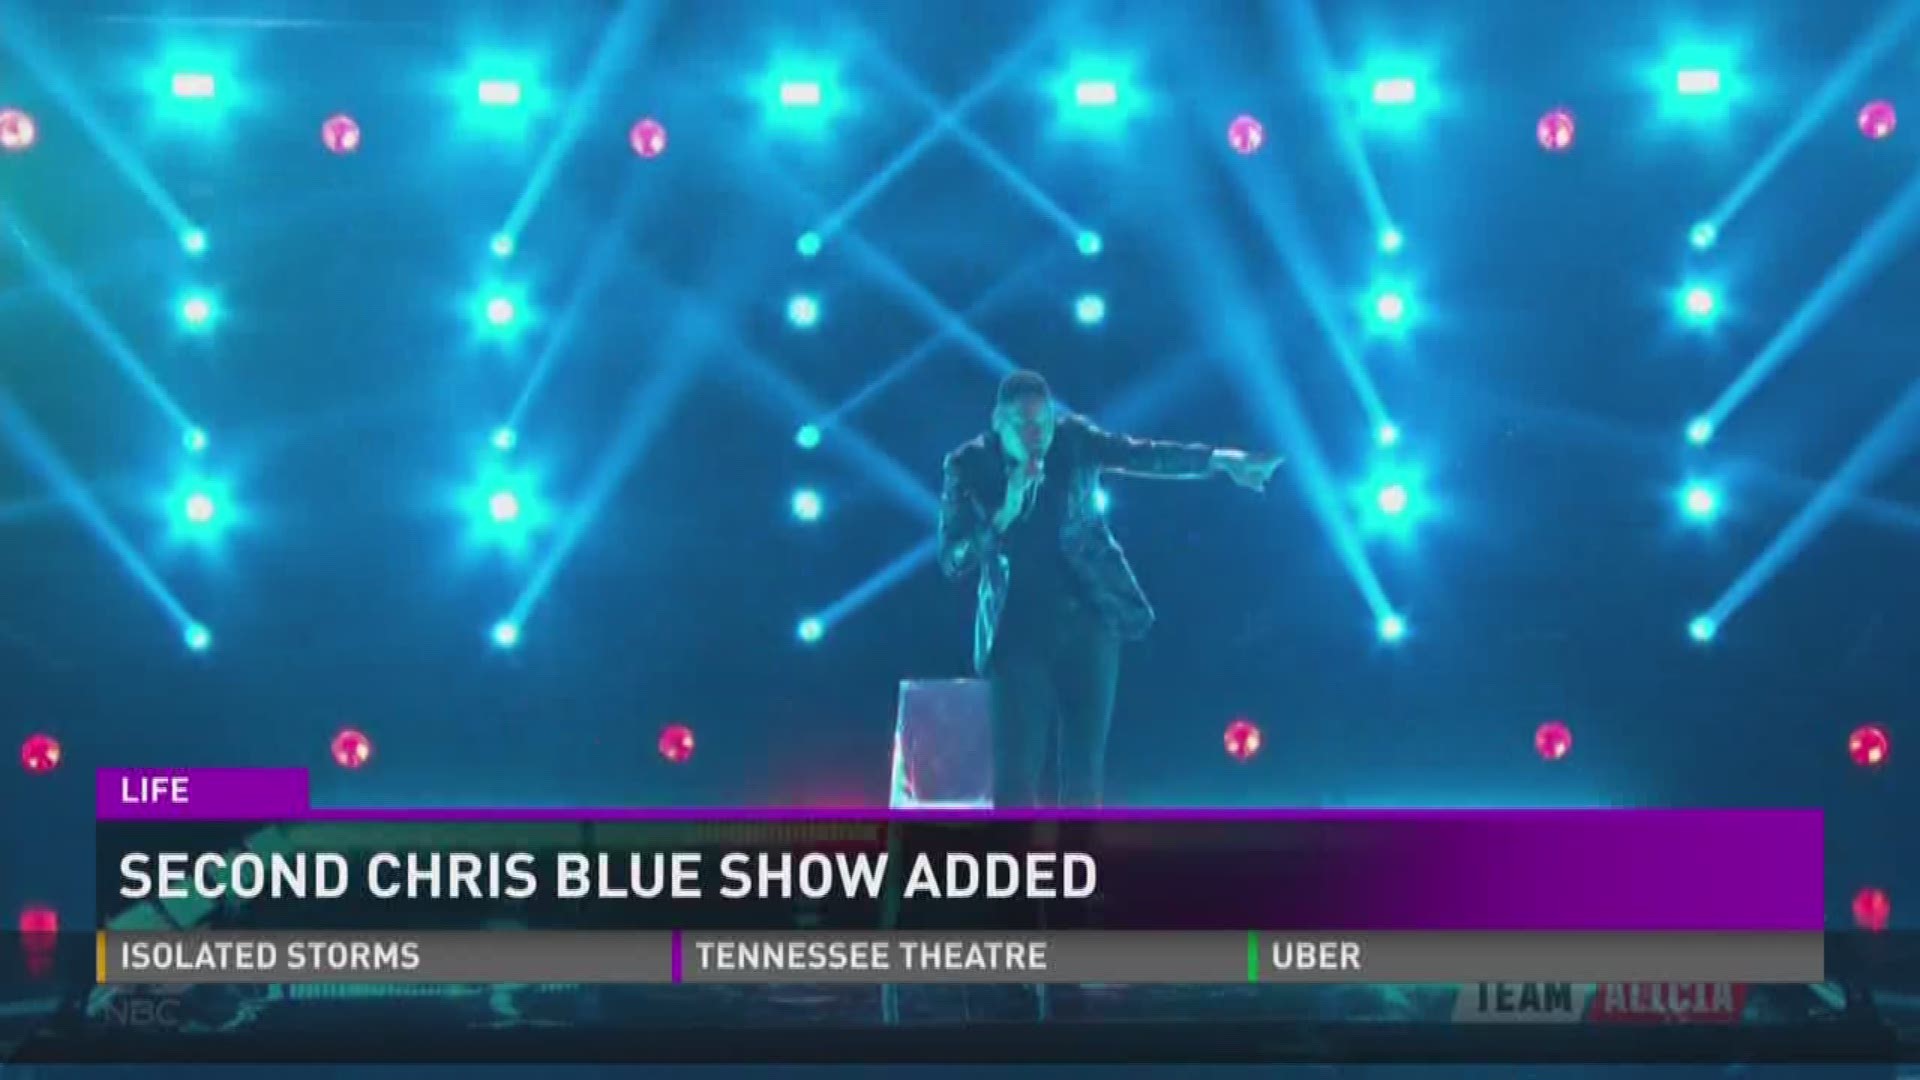 Tickets sold out for Chris Blue's show at the Tennessee Theatre, so by popular demand the theatre booked him for a second show.